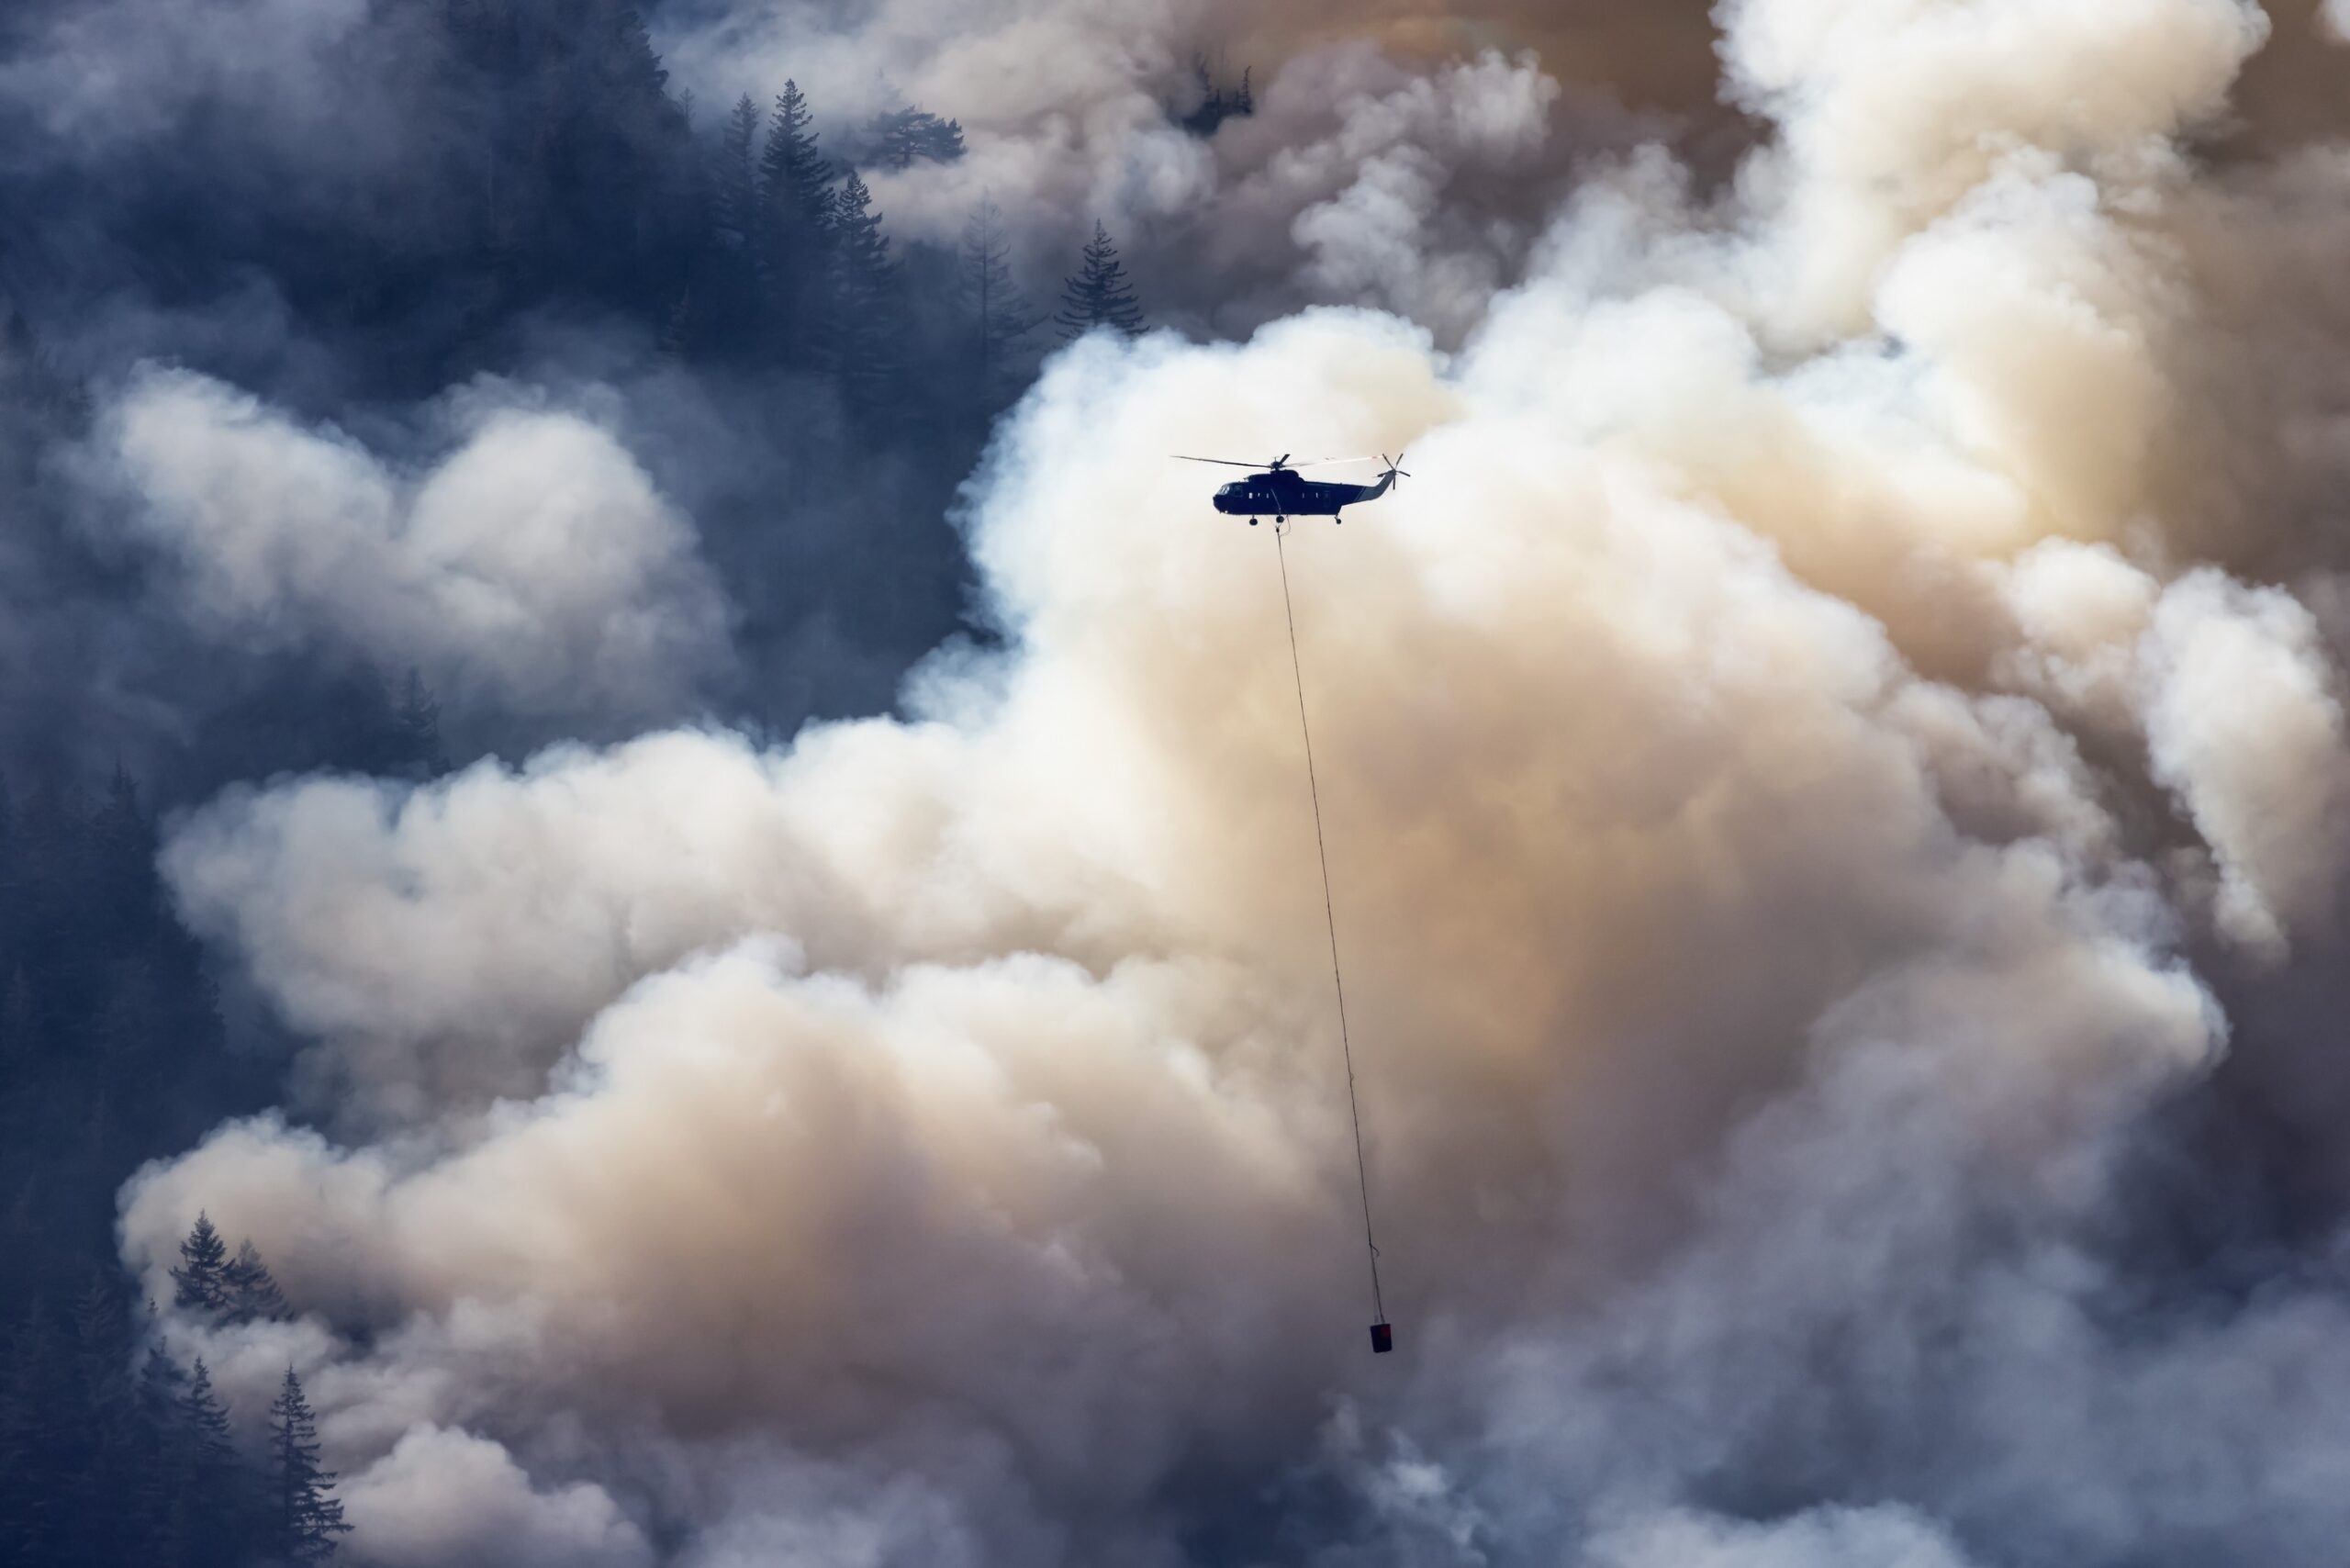 A helicopter flying above the smoke from a forest fire.